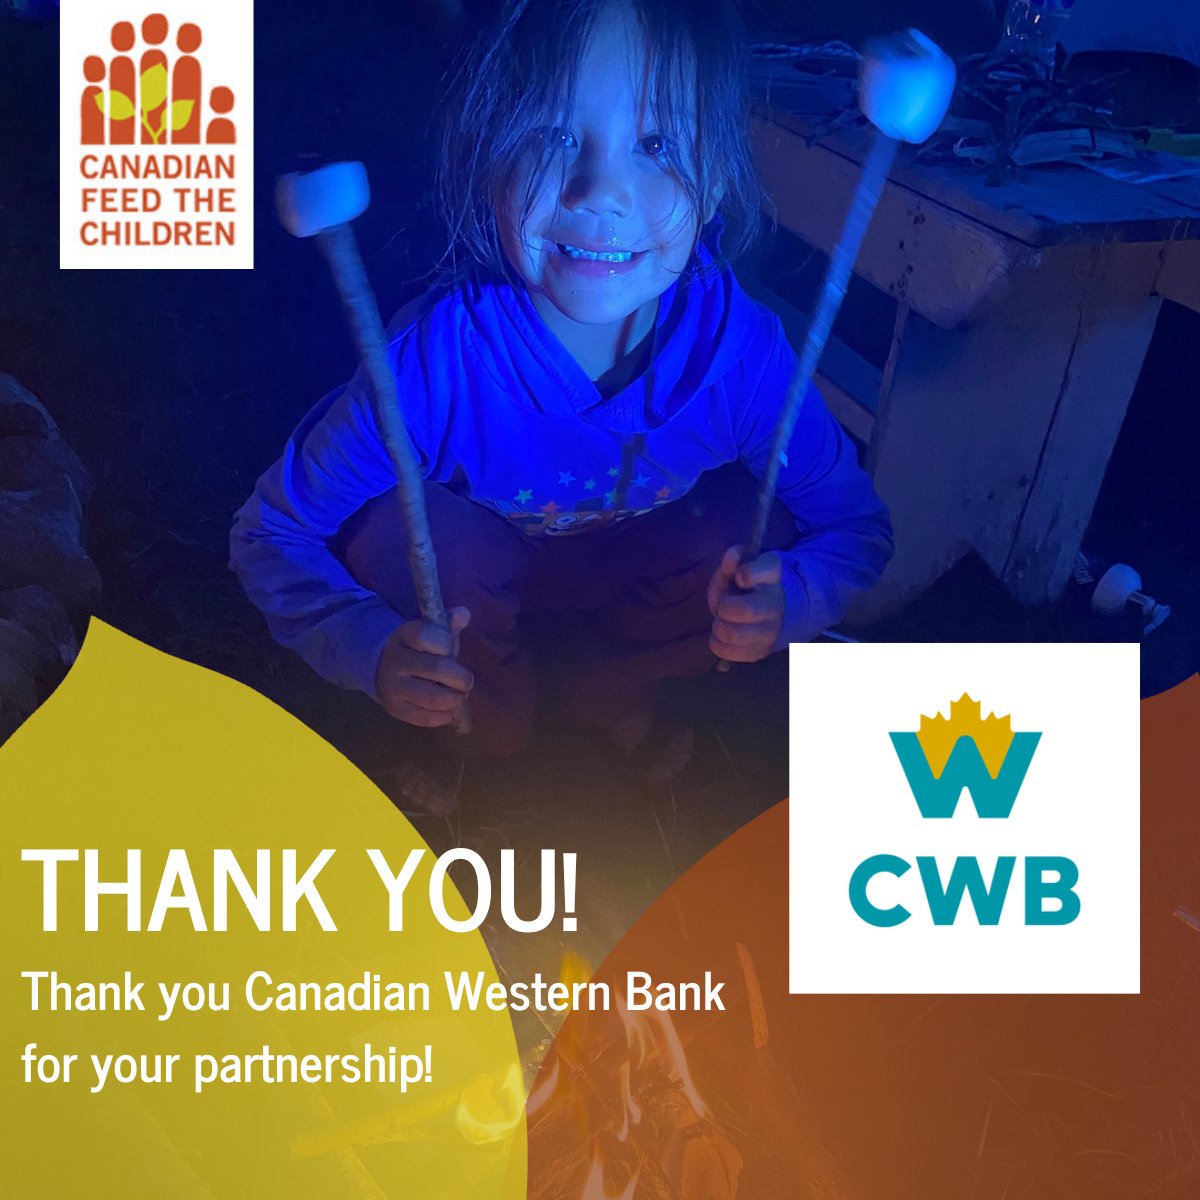 #ThankYouThursday to @CWBCommunity for your support for Indigenous communities in Canada. We appreciate your partnership and all that you do to help children, families and communities thrive!